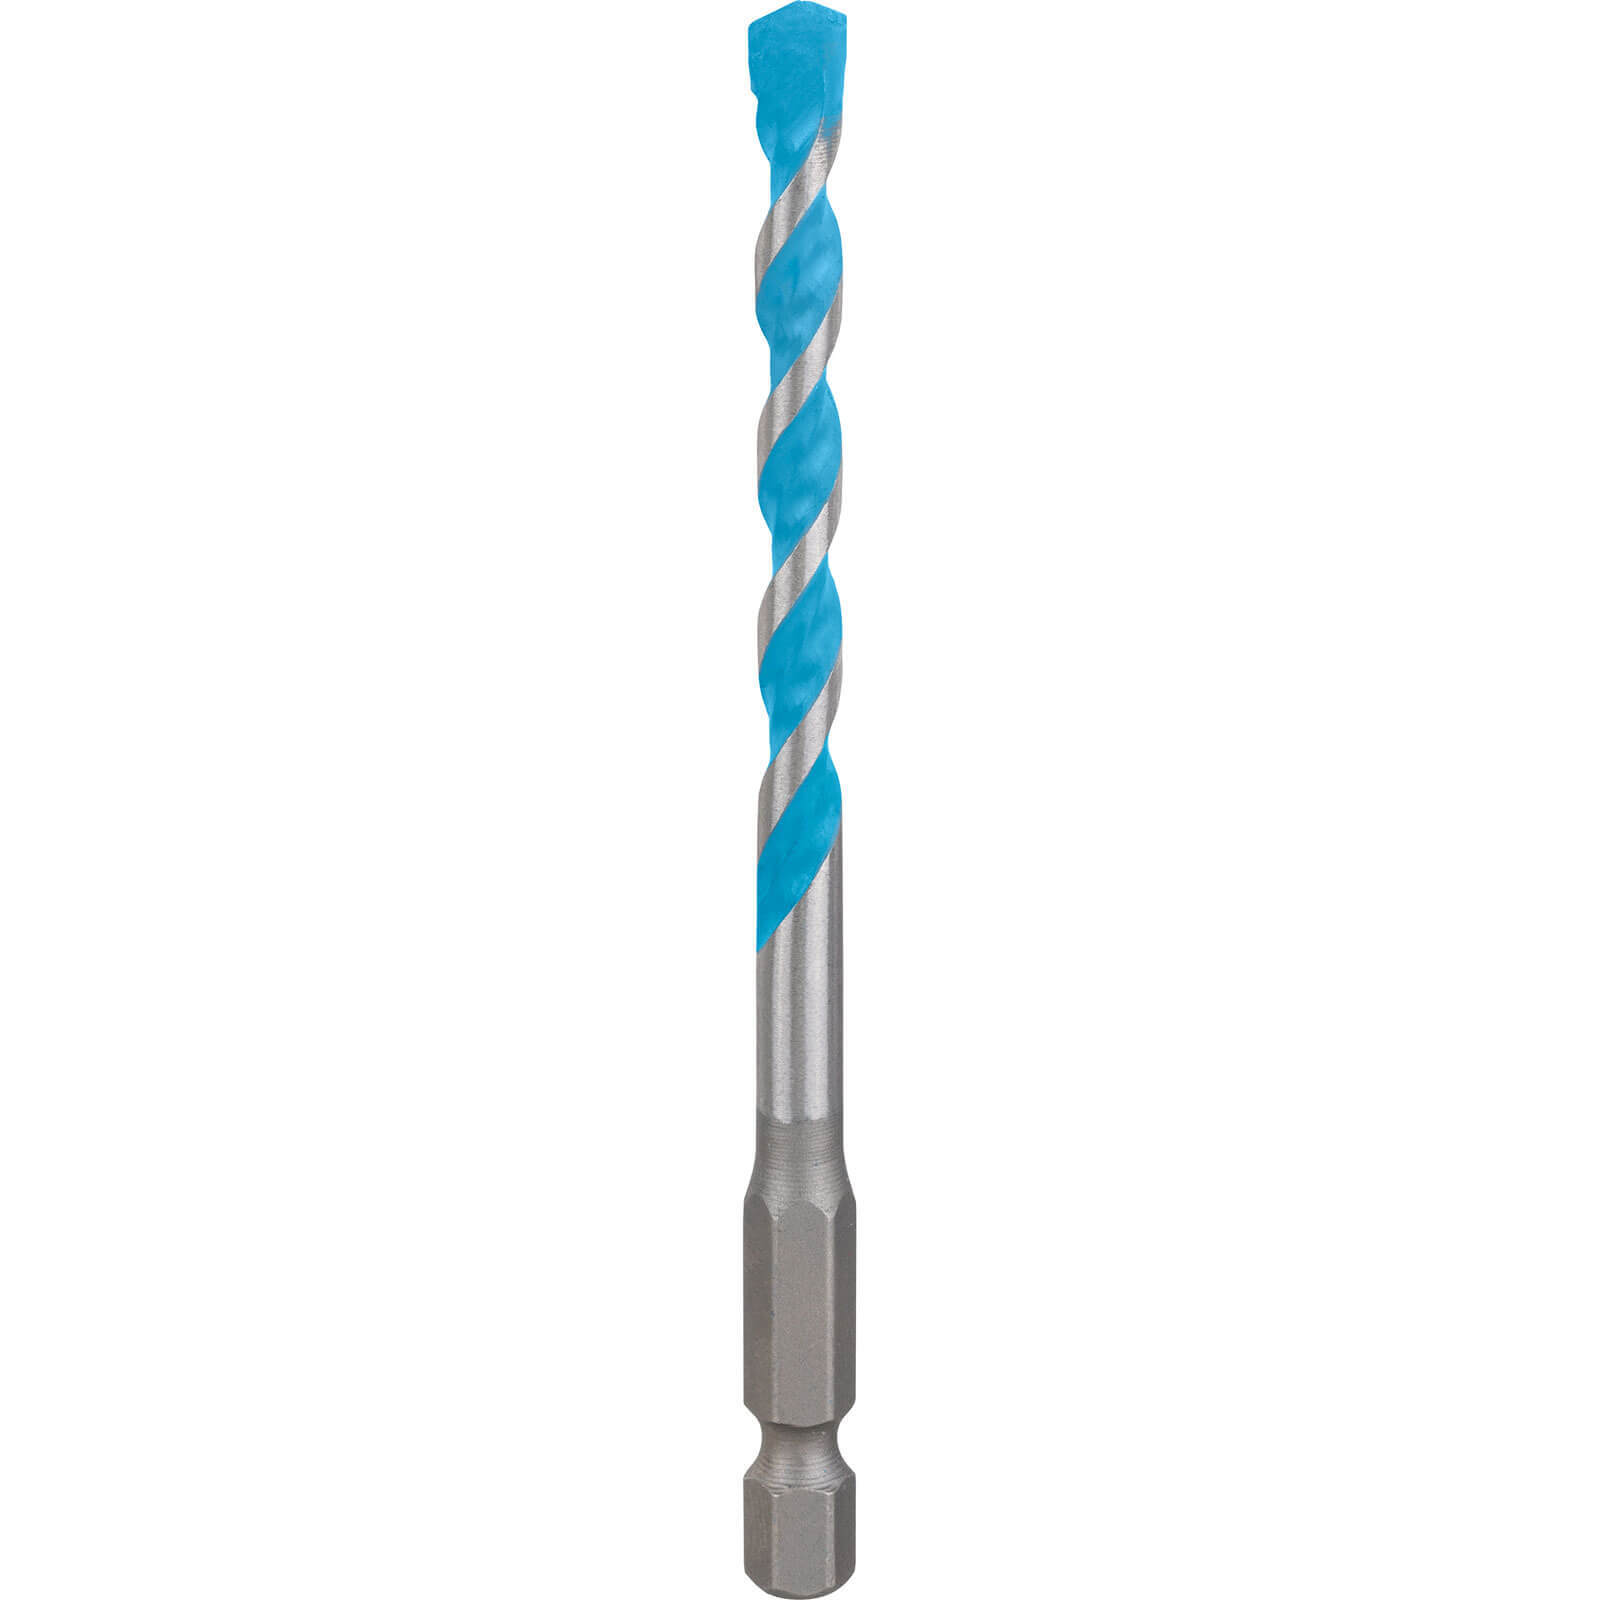 Image of Bosch Expert HEX-9 Multi Construction Drill Bit 6mm 150mm Pack of 1